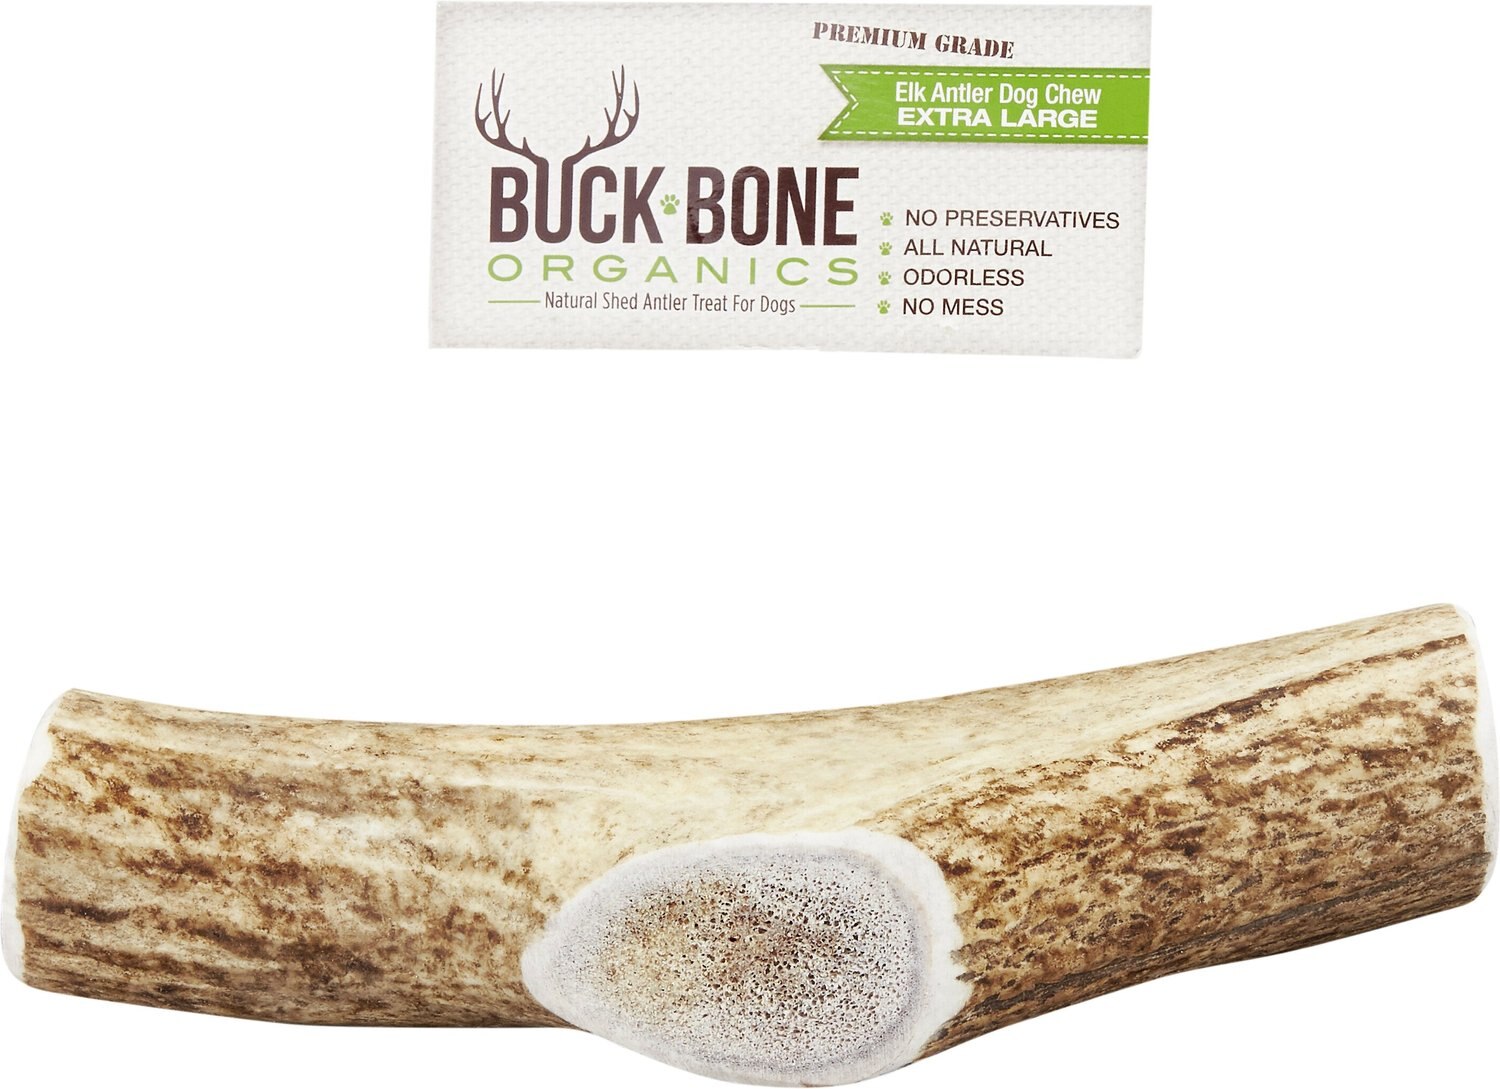 8 Inches to 13 Inches Long Healthy Long-Lasting Treat Happy Dog Guarantee! for Medium to Large Size Dogs and Puppies Medium Natural Whitetail Deer Antler Dog Chew Big Dog Antler Chews 